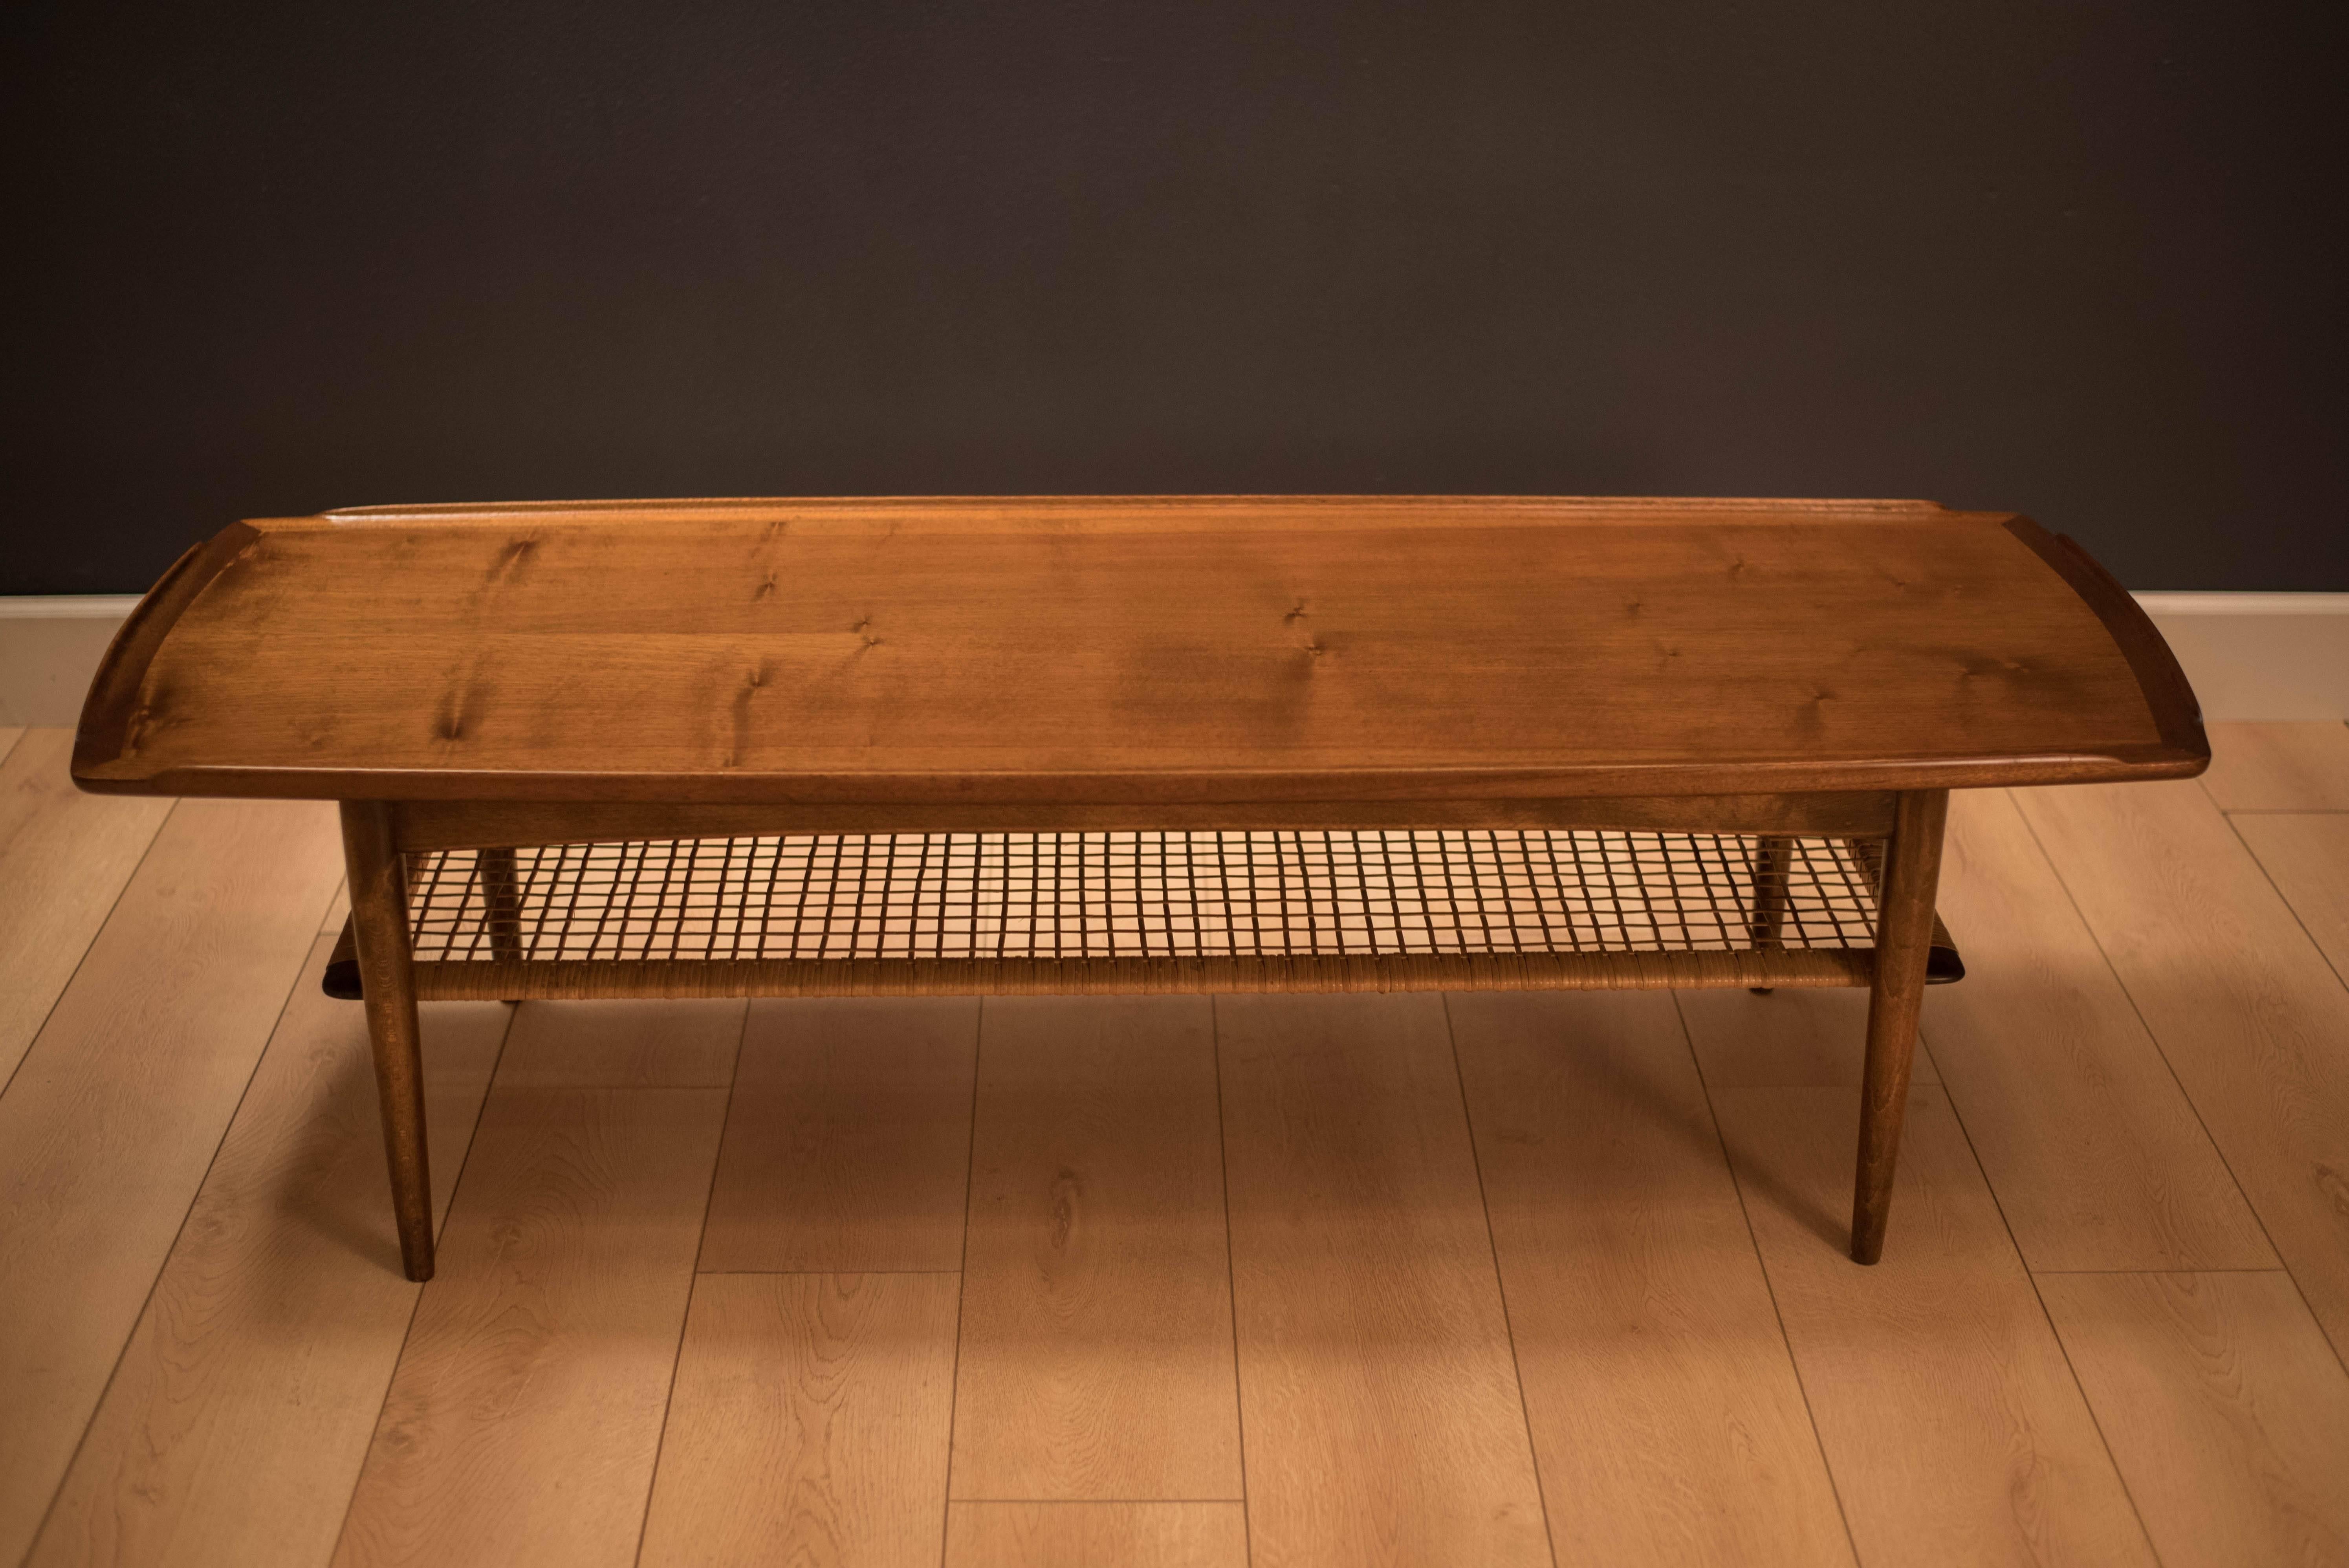 Danish modern coffee table designed by Poul Jensen for Selig. This piece is made of walnut and displays sculpted raised edges with a two-tier magazine shelf made of cane. 

.